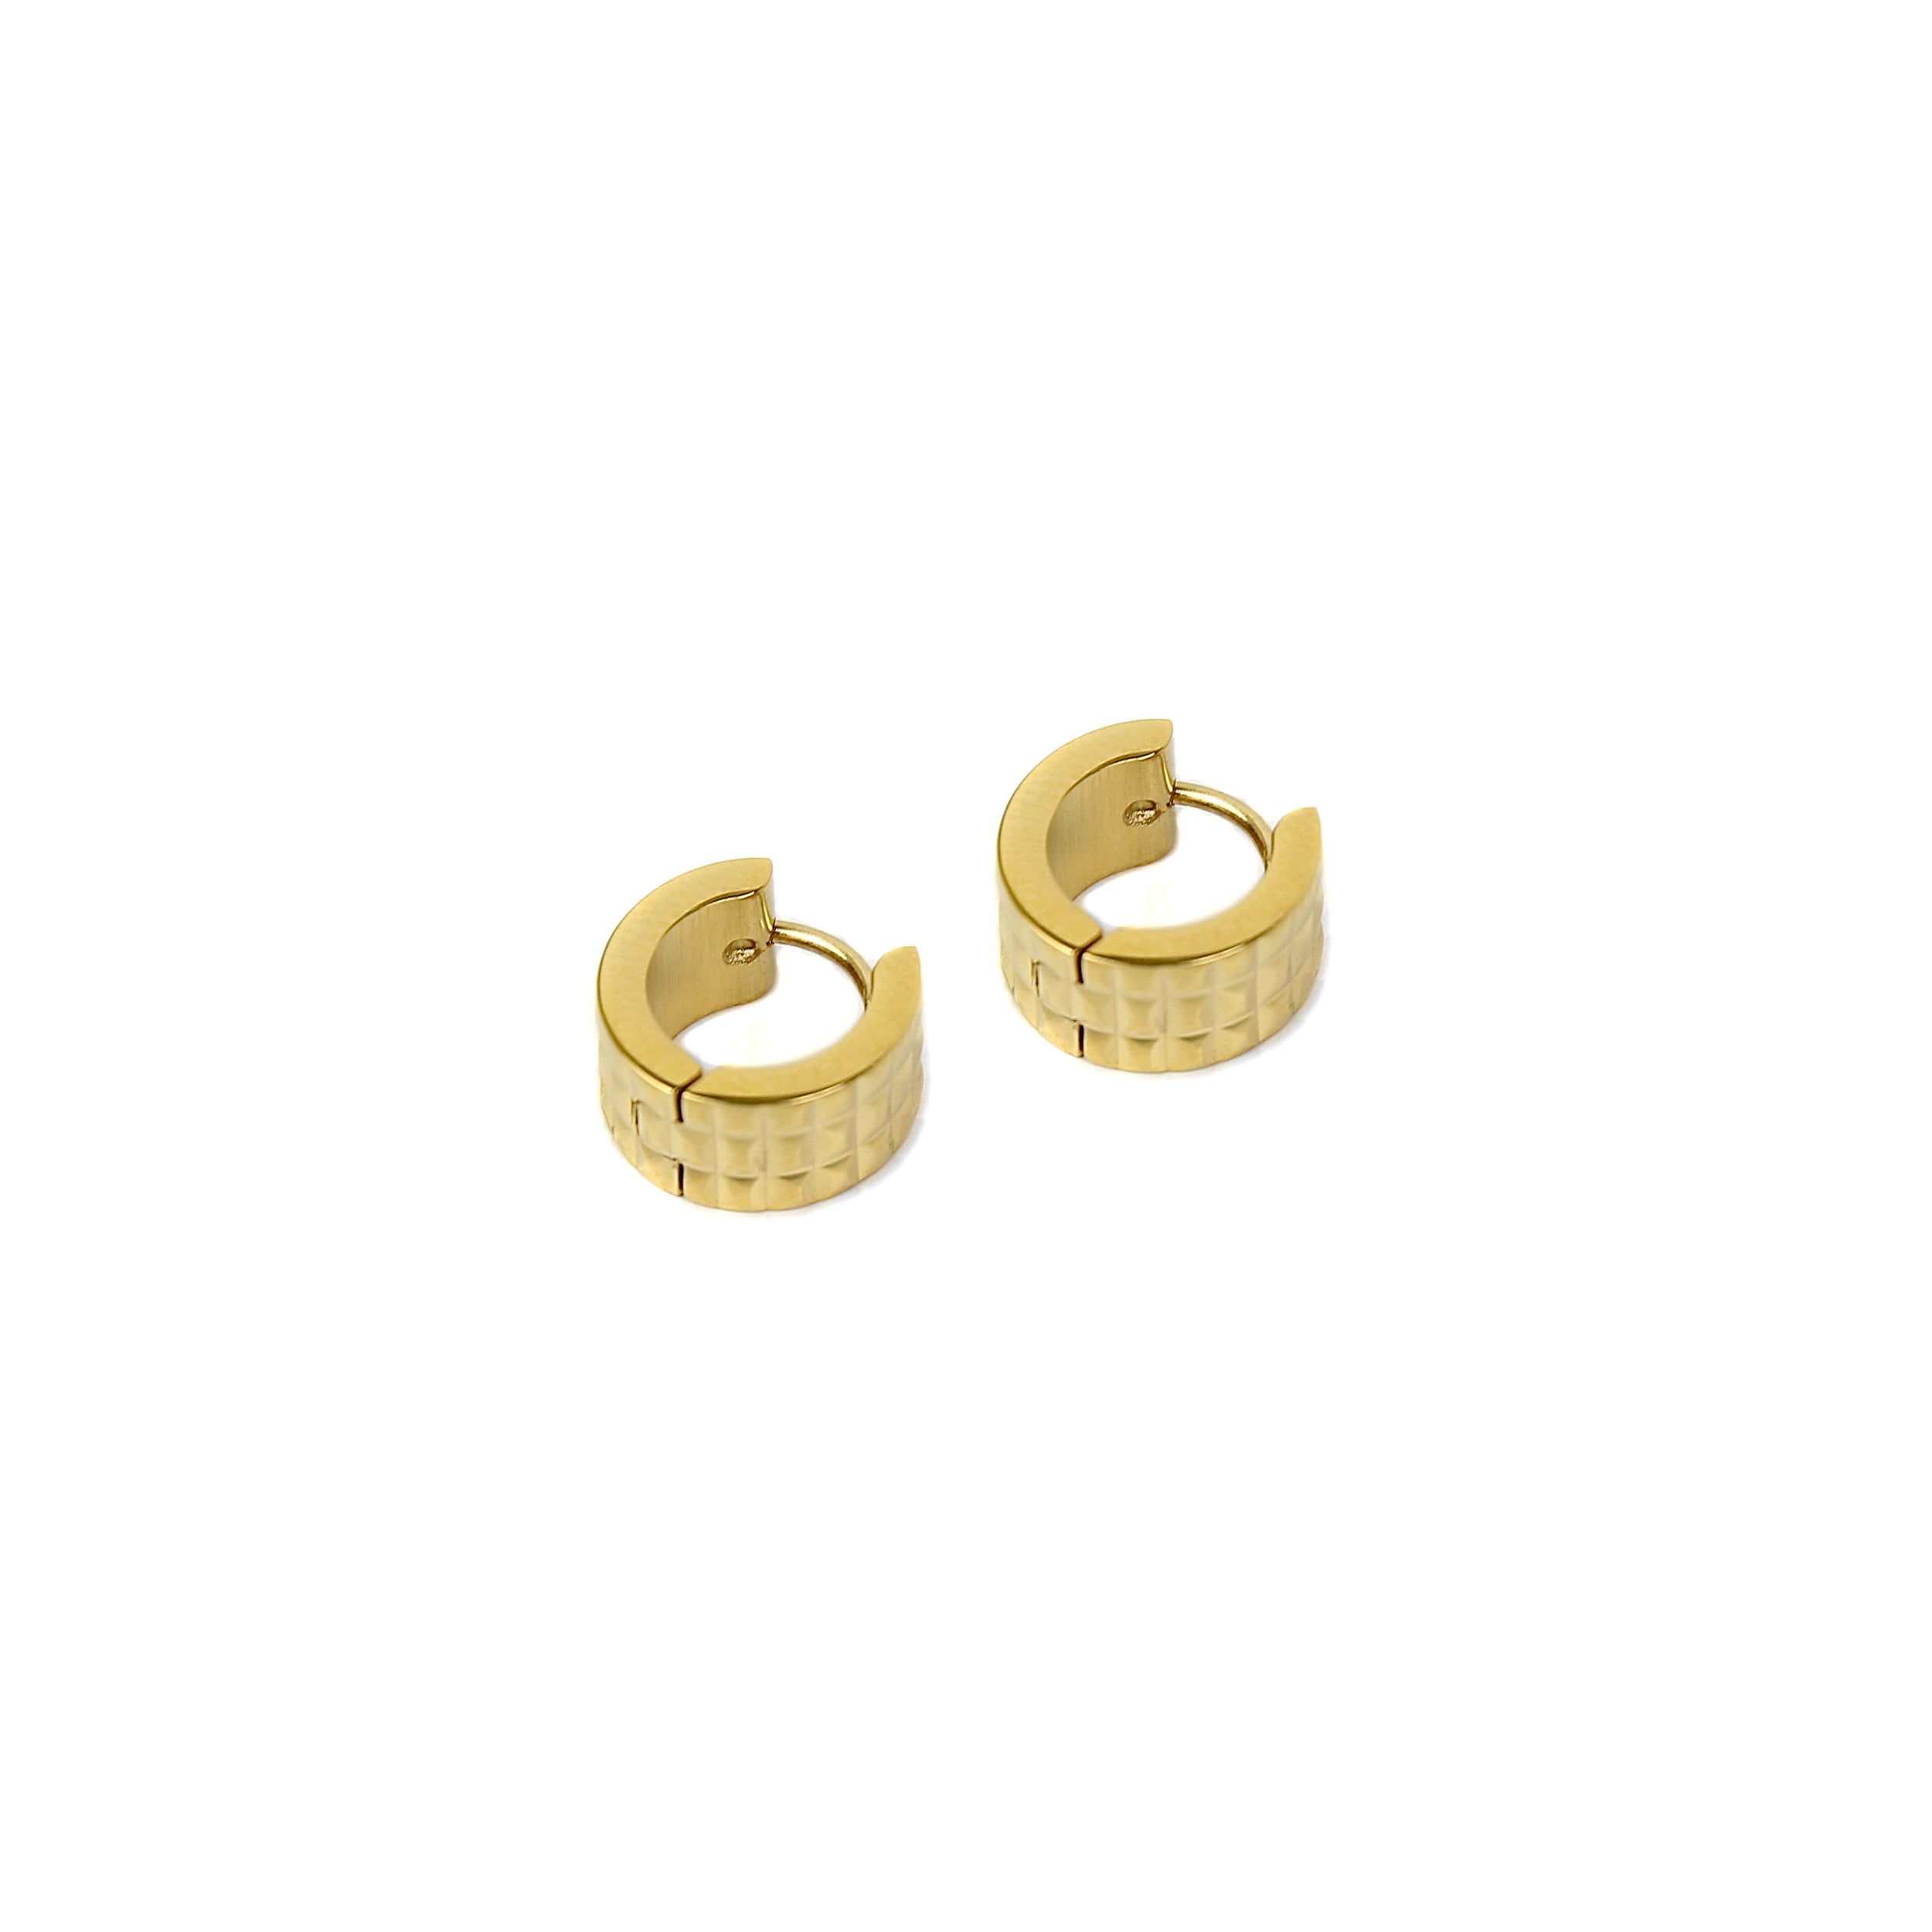 Round Stud Earring - 7mm Gold